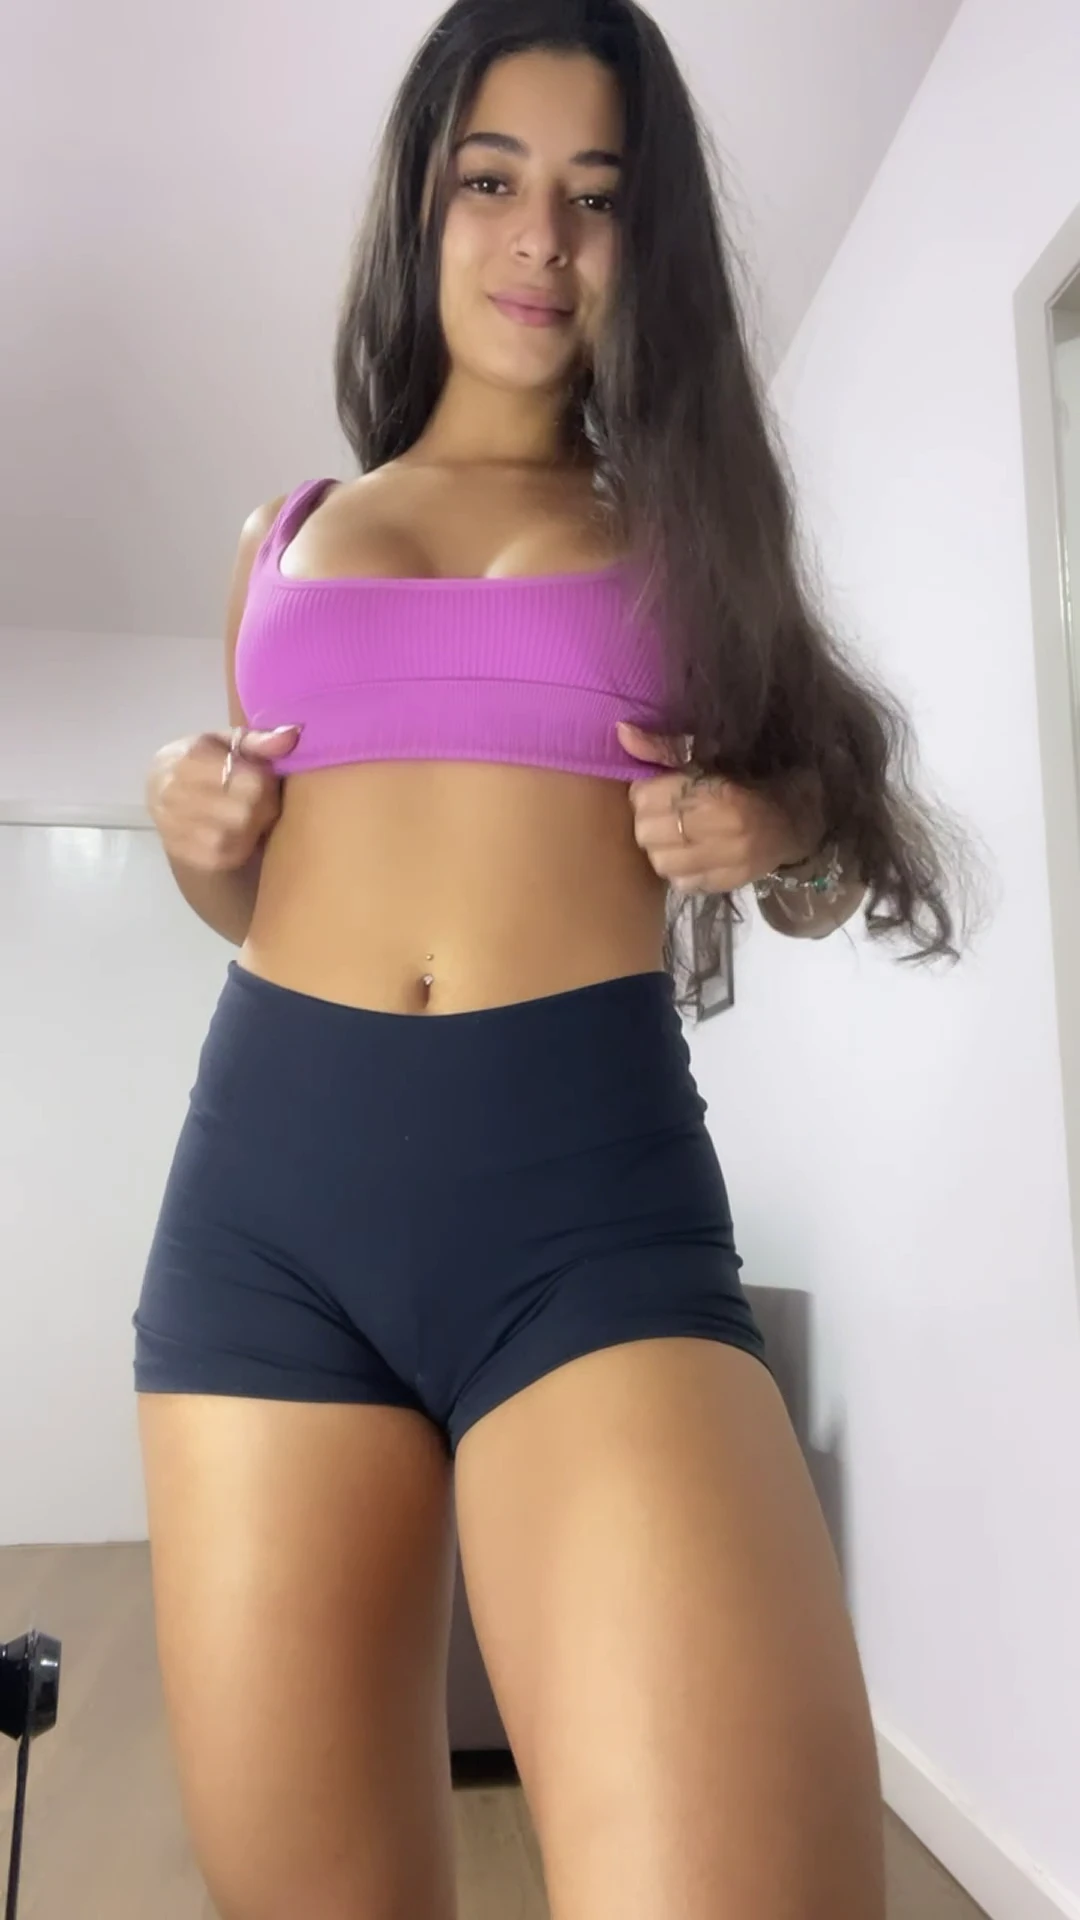 Describe my body in one word please